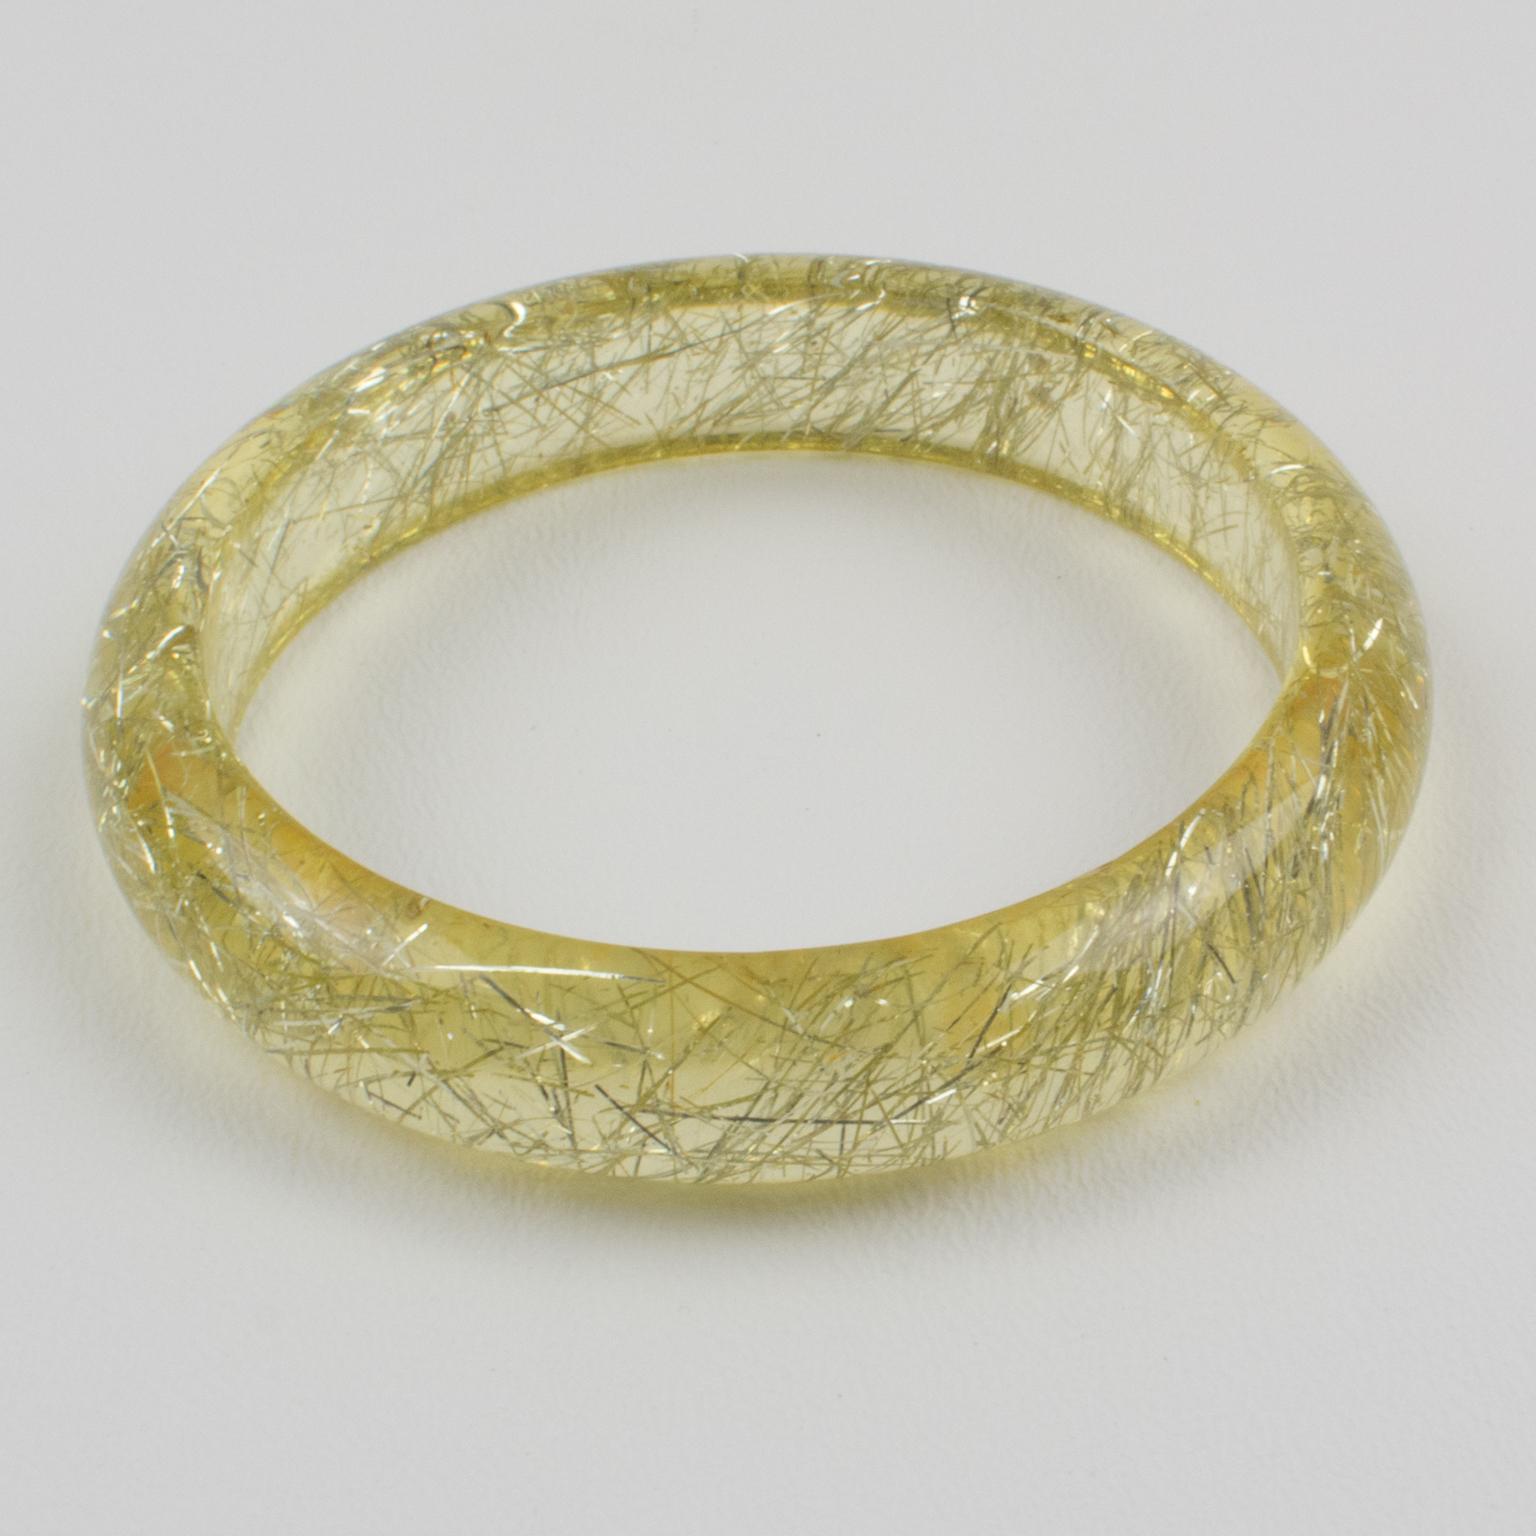 This lovely Lucite bracelet bangle has a domed shape and is comprised of transparent lemon yellow Lucite which is injected with metallic thread inclusions in silver color. The metallic threads sparkle like those of Christmas tinsels. There is no